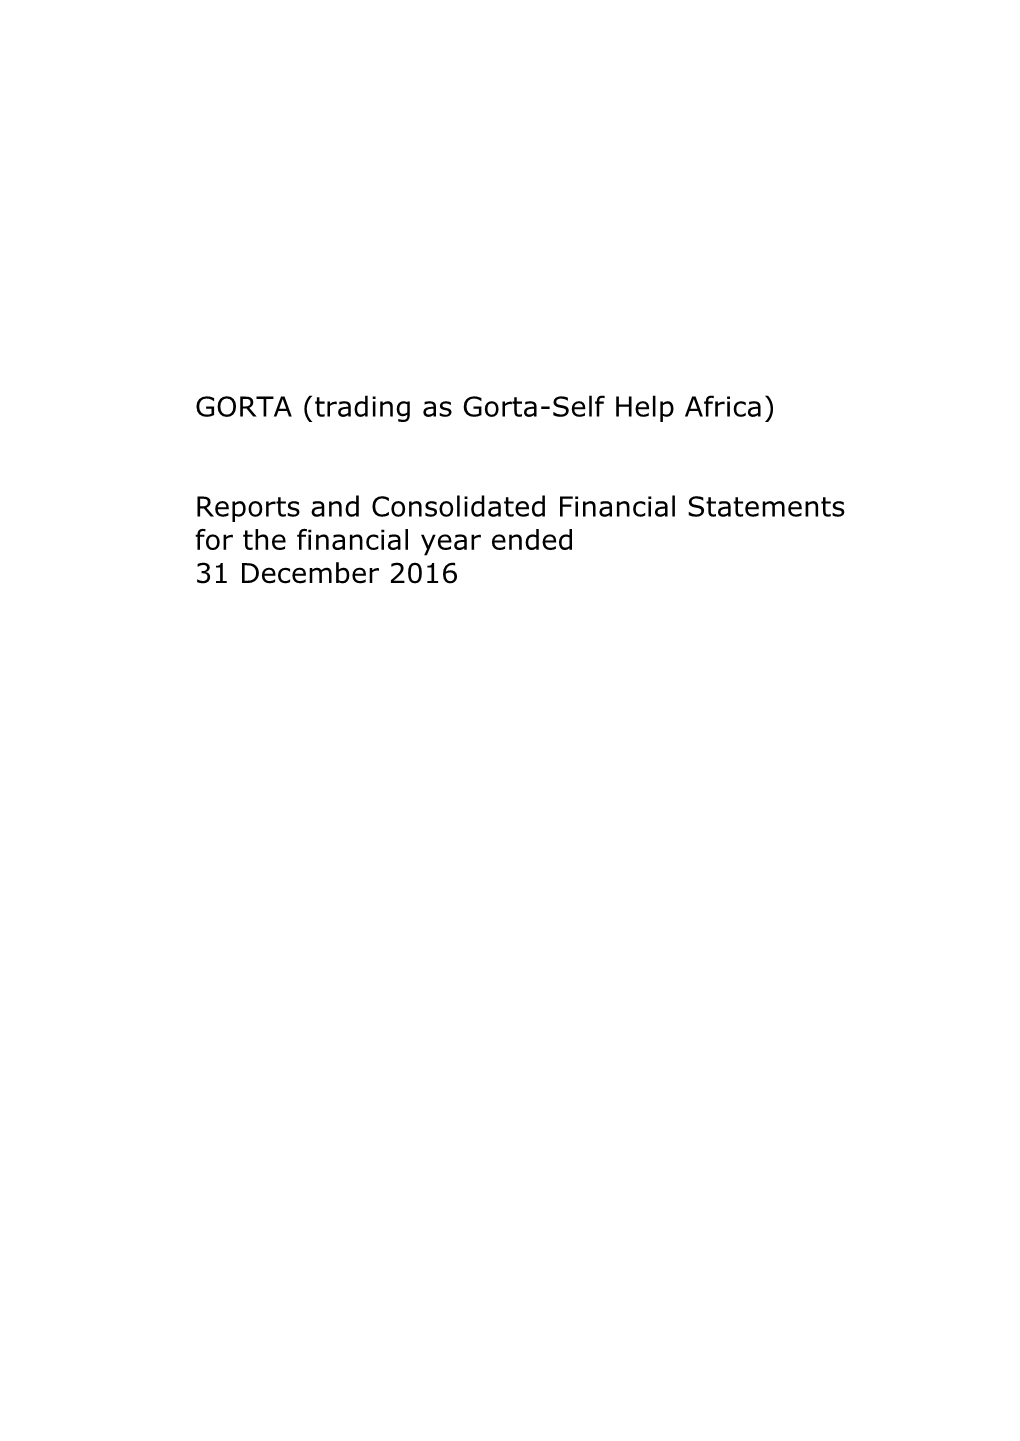 GORTA (Trading As Gorta-Self Help Africa) Reports and Consolidated